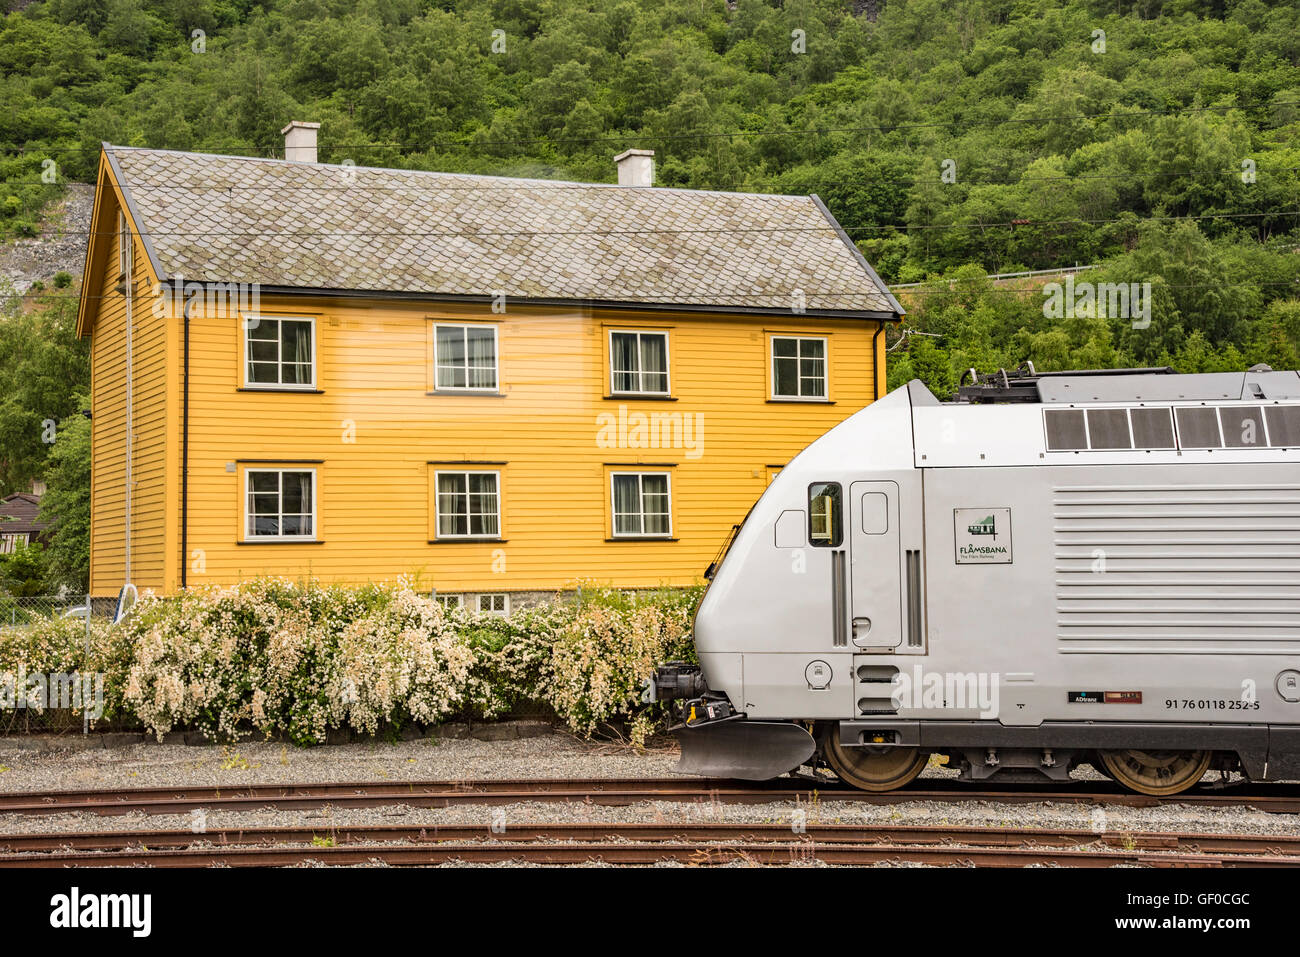 Flam train and bright yellow building on tracks, Flam, Norway, Scandanavia, European Stock Photo